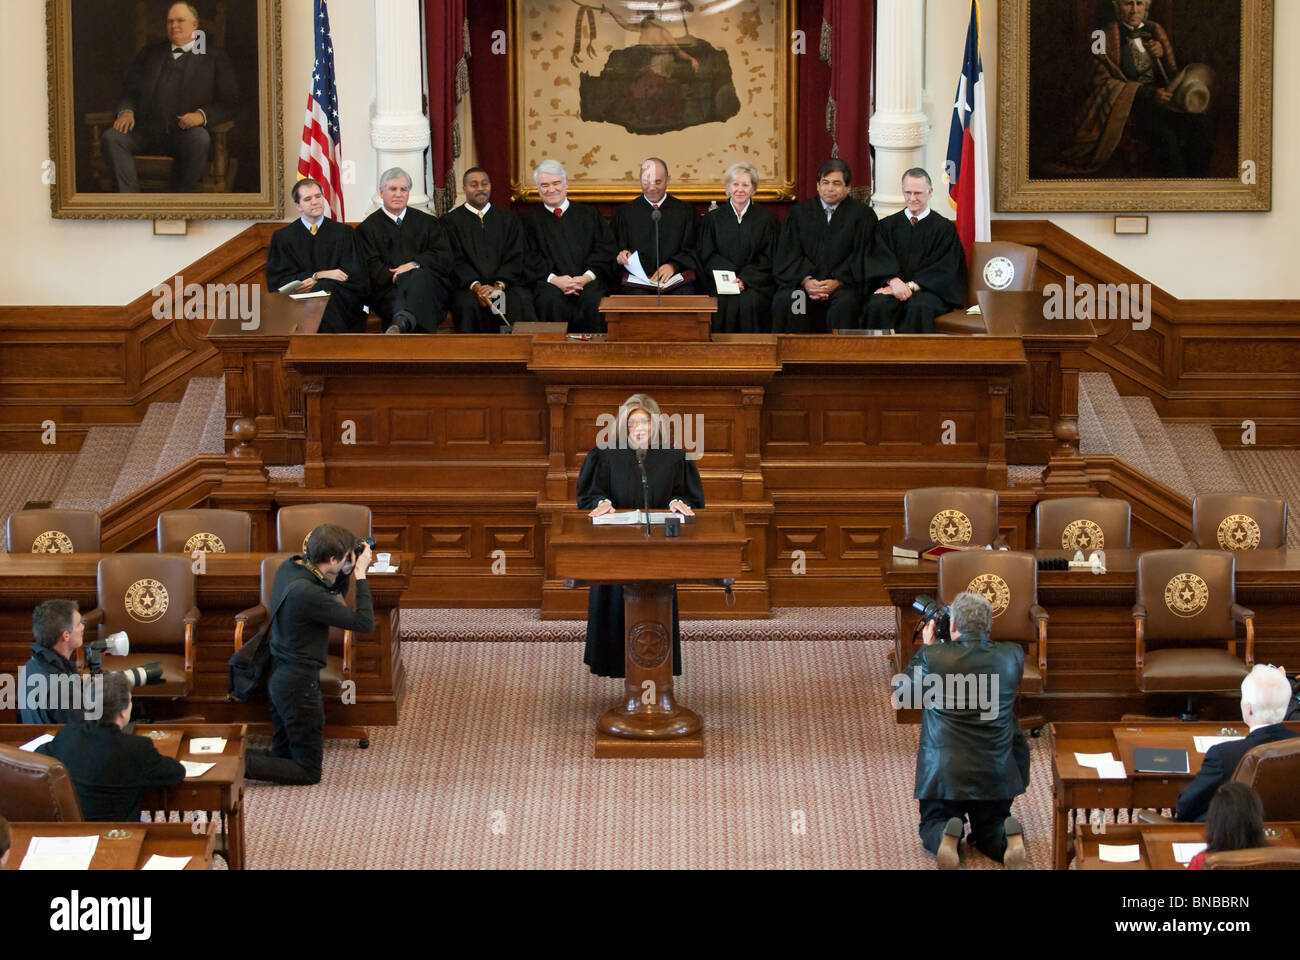 Texas Supreme Court Justice Eva Guzman at her swearing-in ceremony in the House chamber of the Texas Capitol. Stock Photo